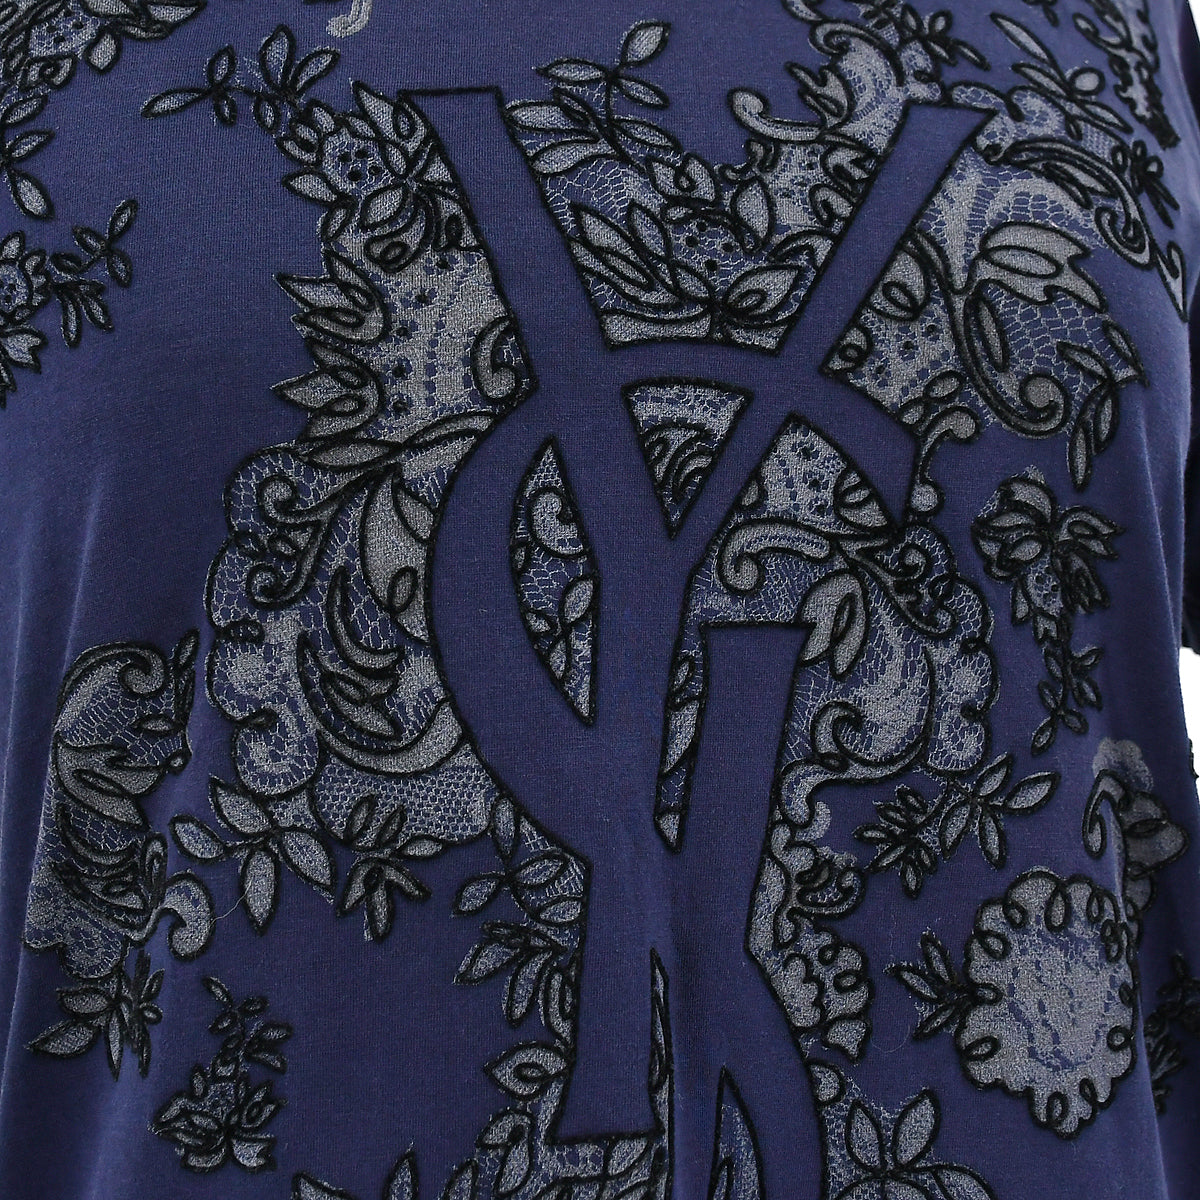 Yves Saint Laurent YSL floral-embroidered T-shirt 